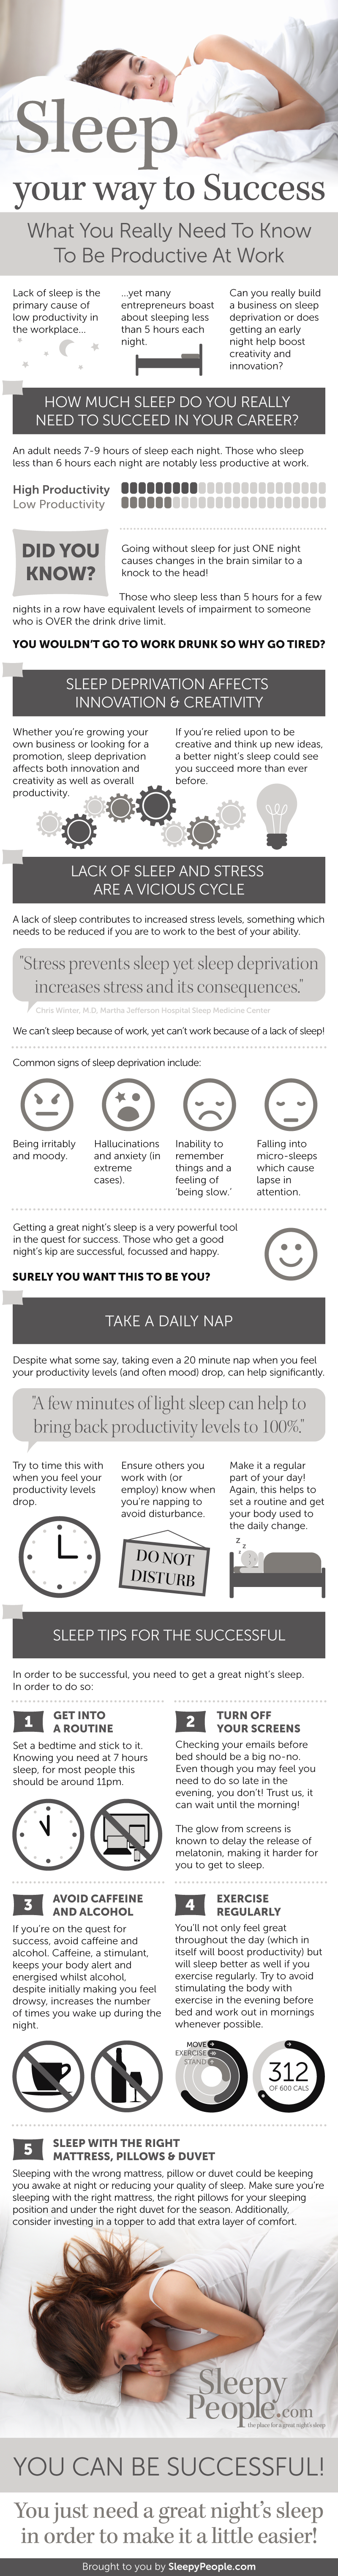 Sleep Your Way to Success [Infographic]